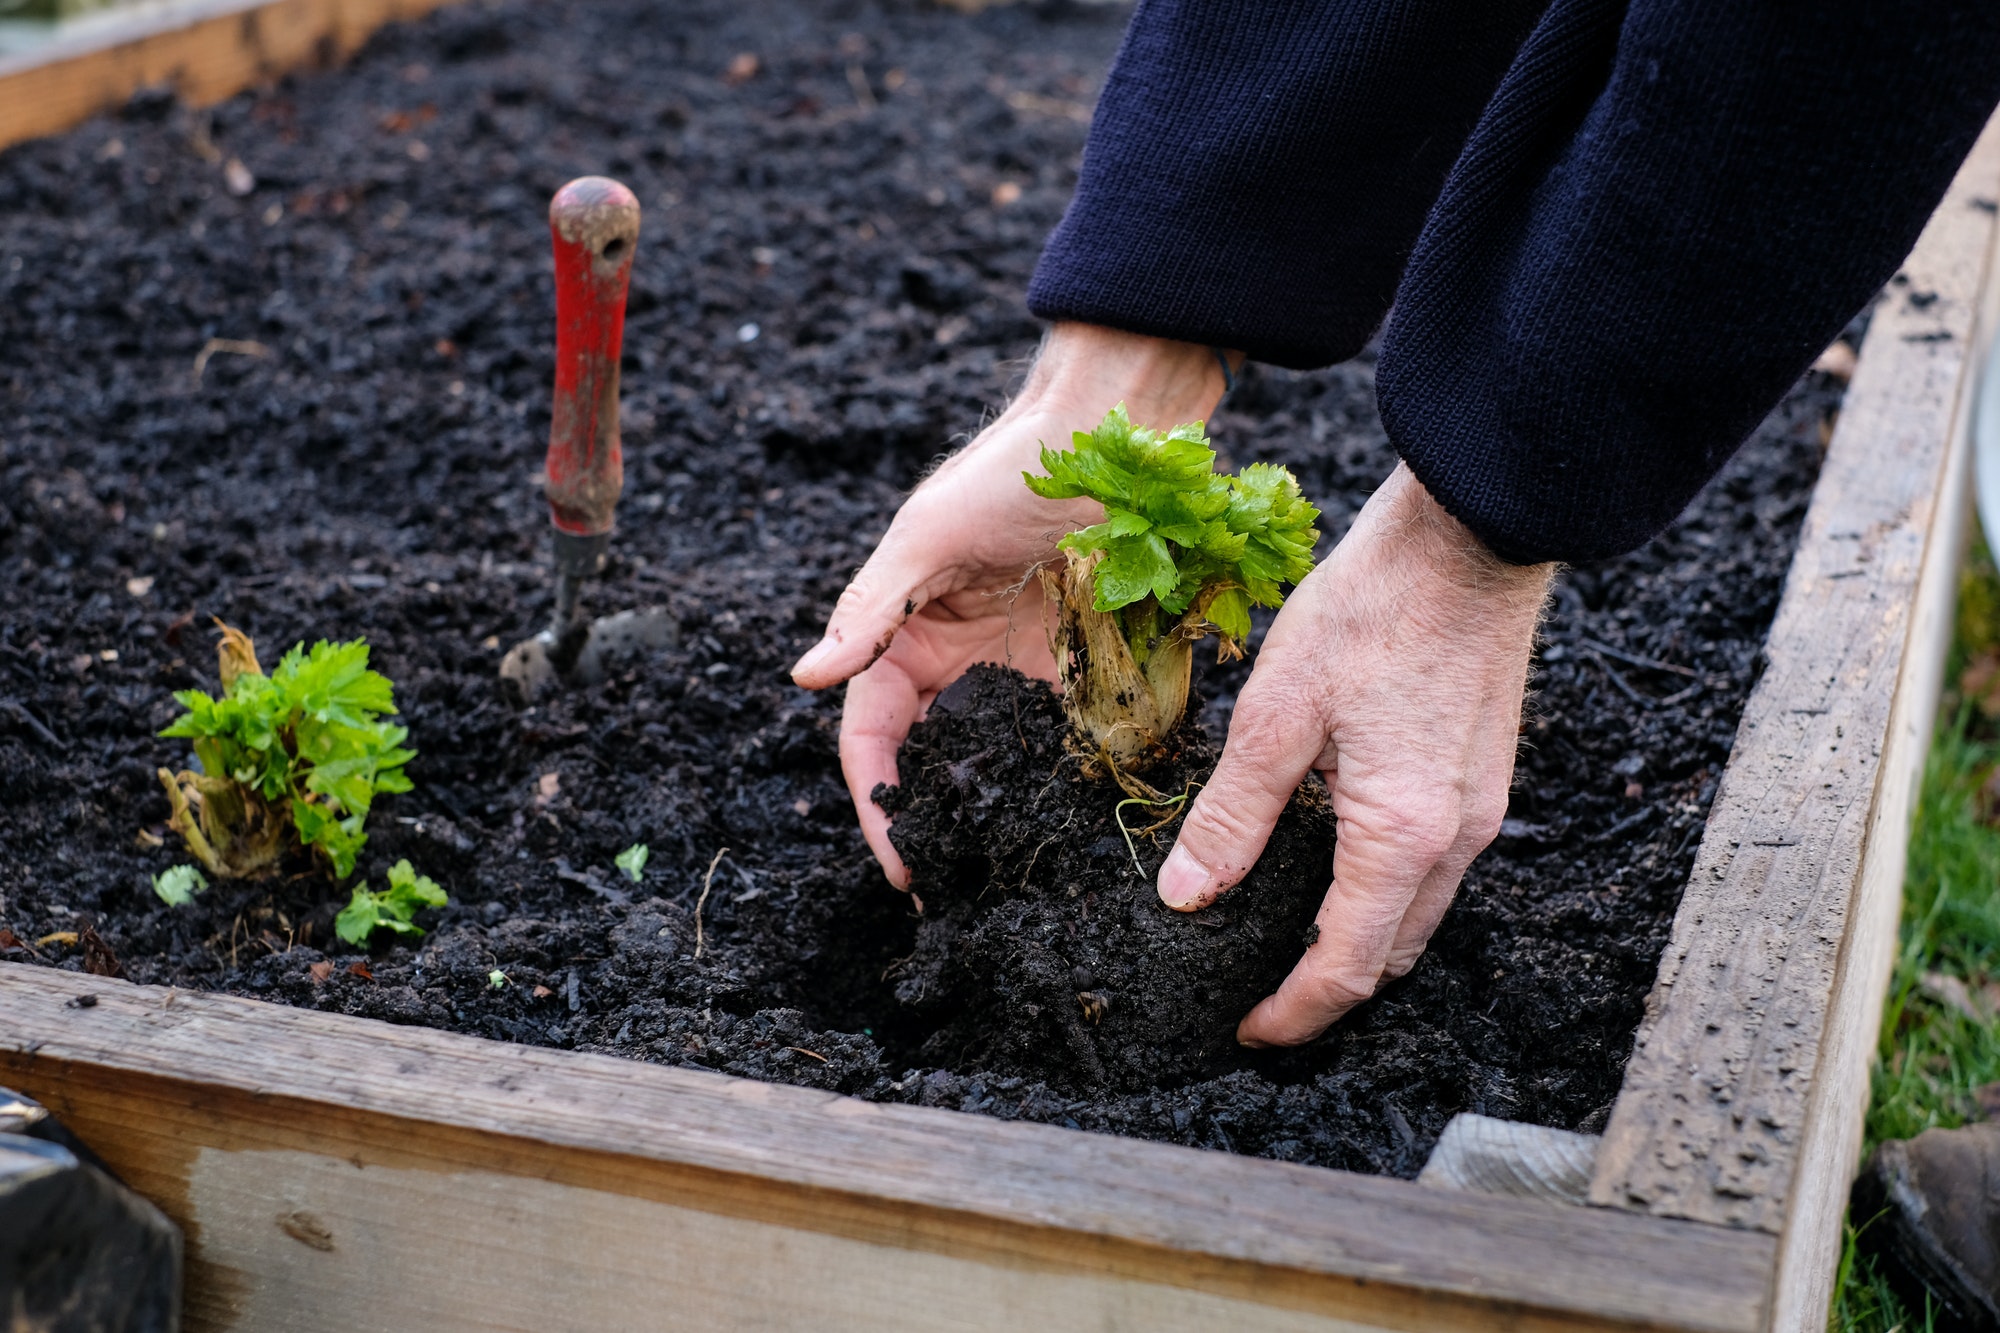 Man planting a vegetable plant in his garden bed